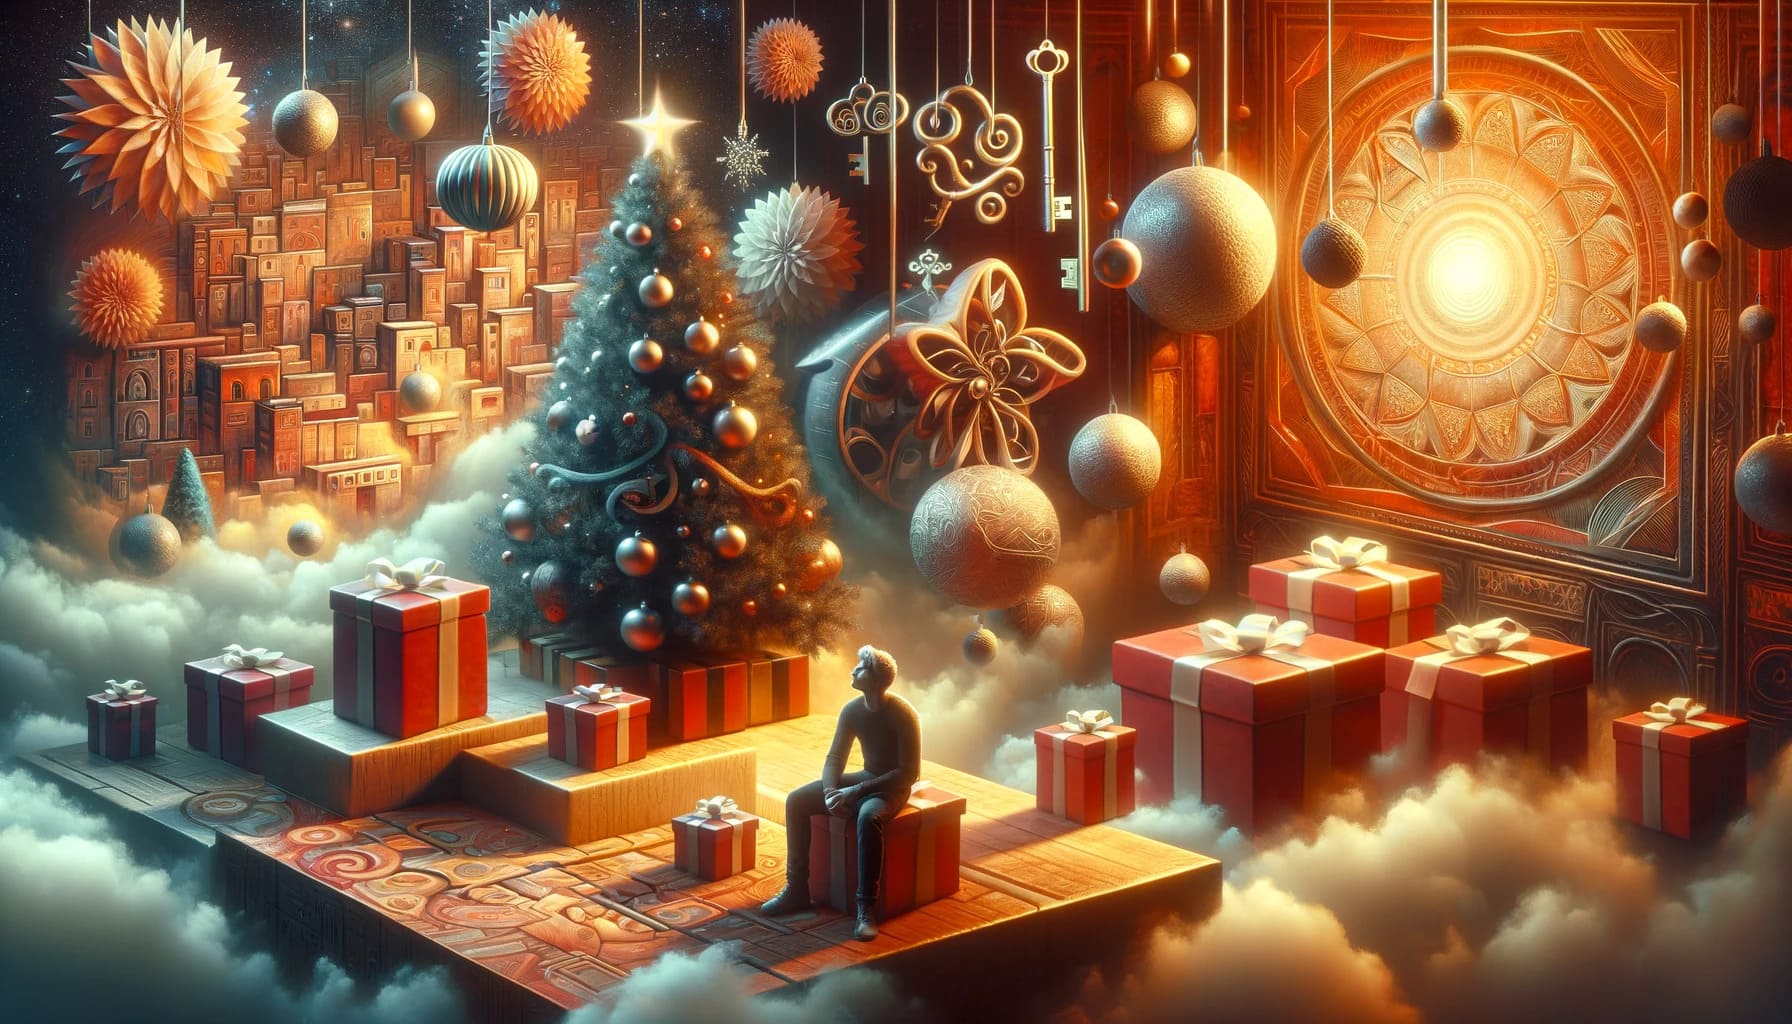 How Can Understanding the Meaning of Christmas Presents in Dreams Help Us